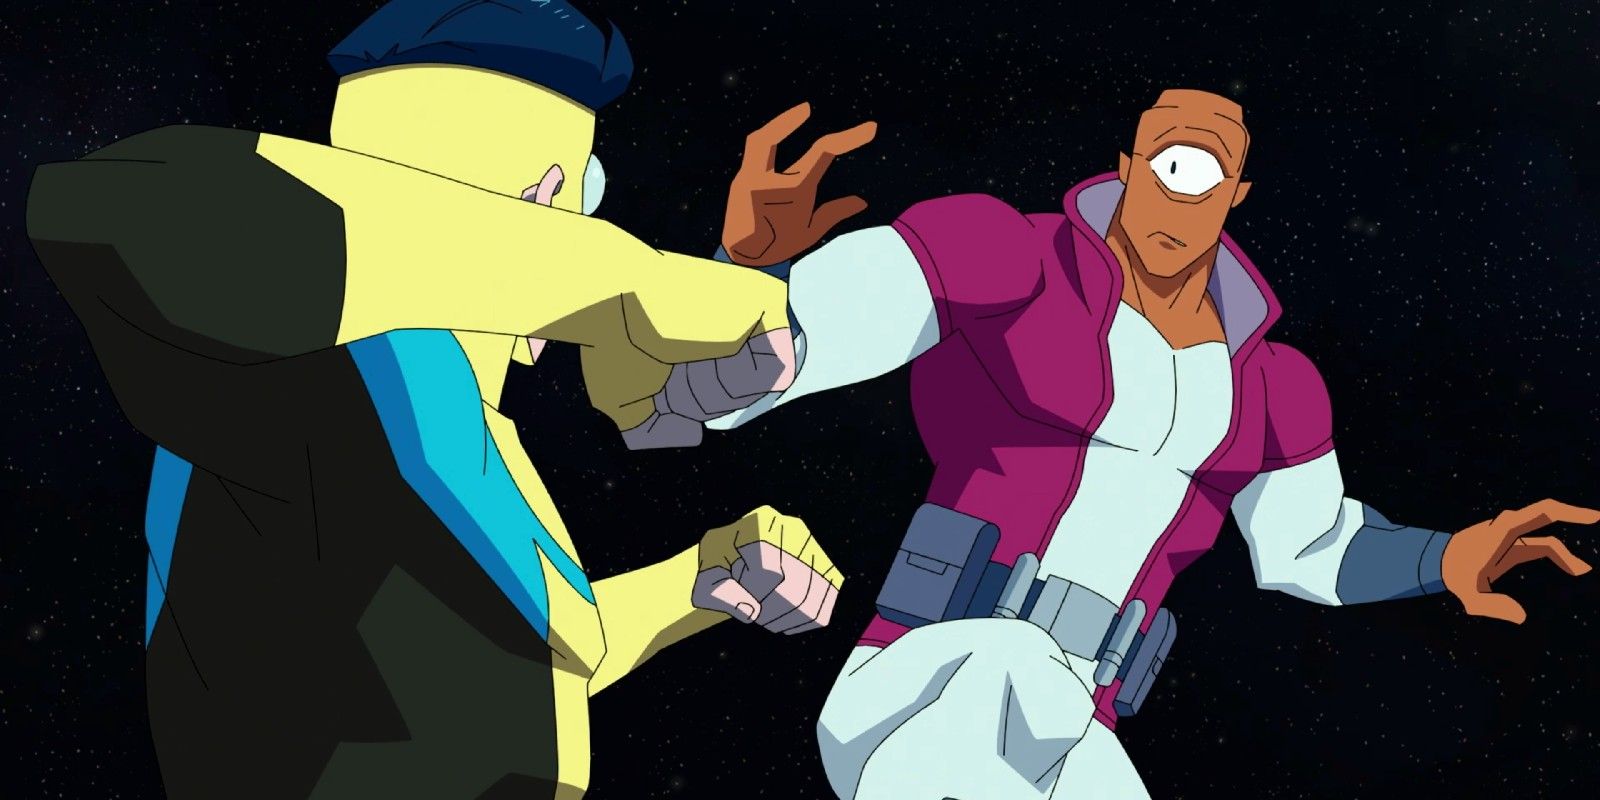 Invincible getting ready to Punch Allen